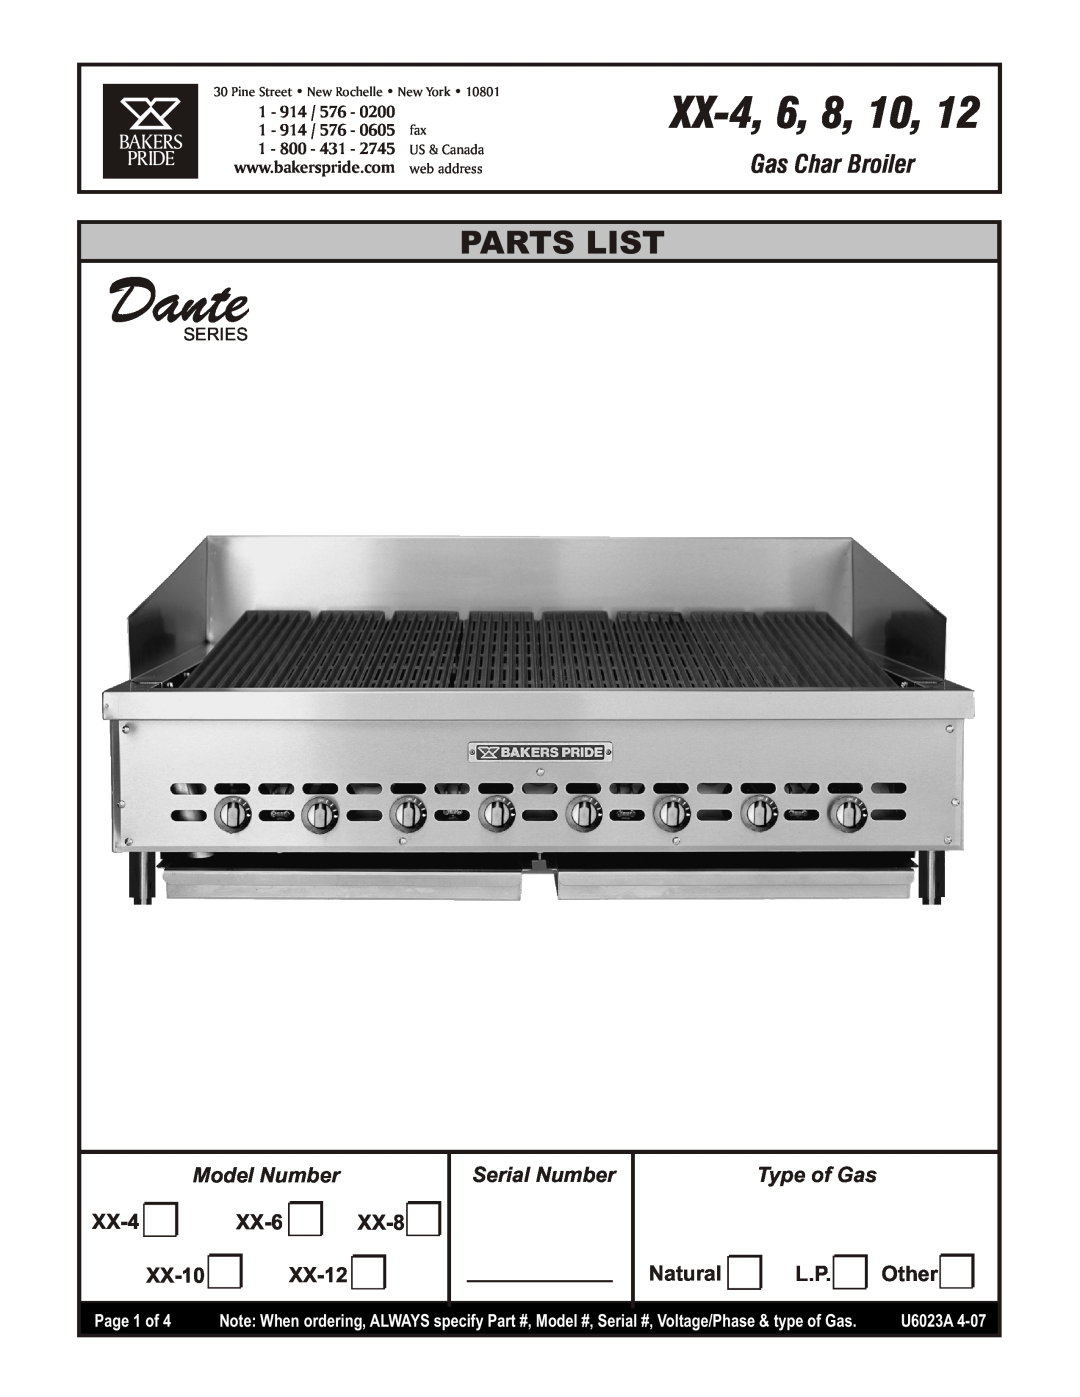 Bakers Pride Oven XX-12GS specifications Job Item #, RADIANT or GLO STONES, Char Broiler, Model XX-8 Model XX-8GS, Bakers 